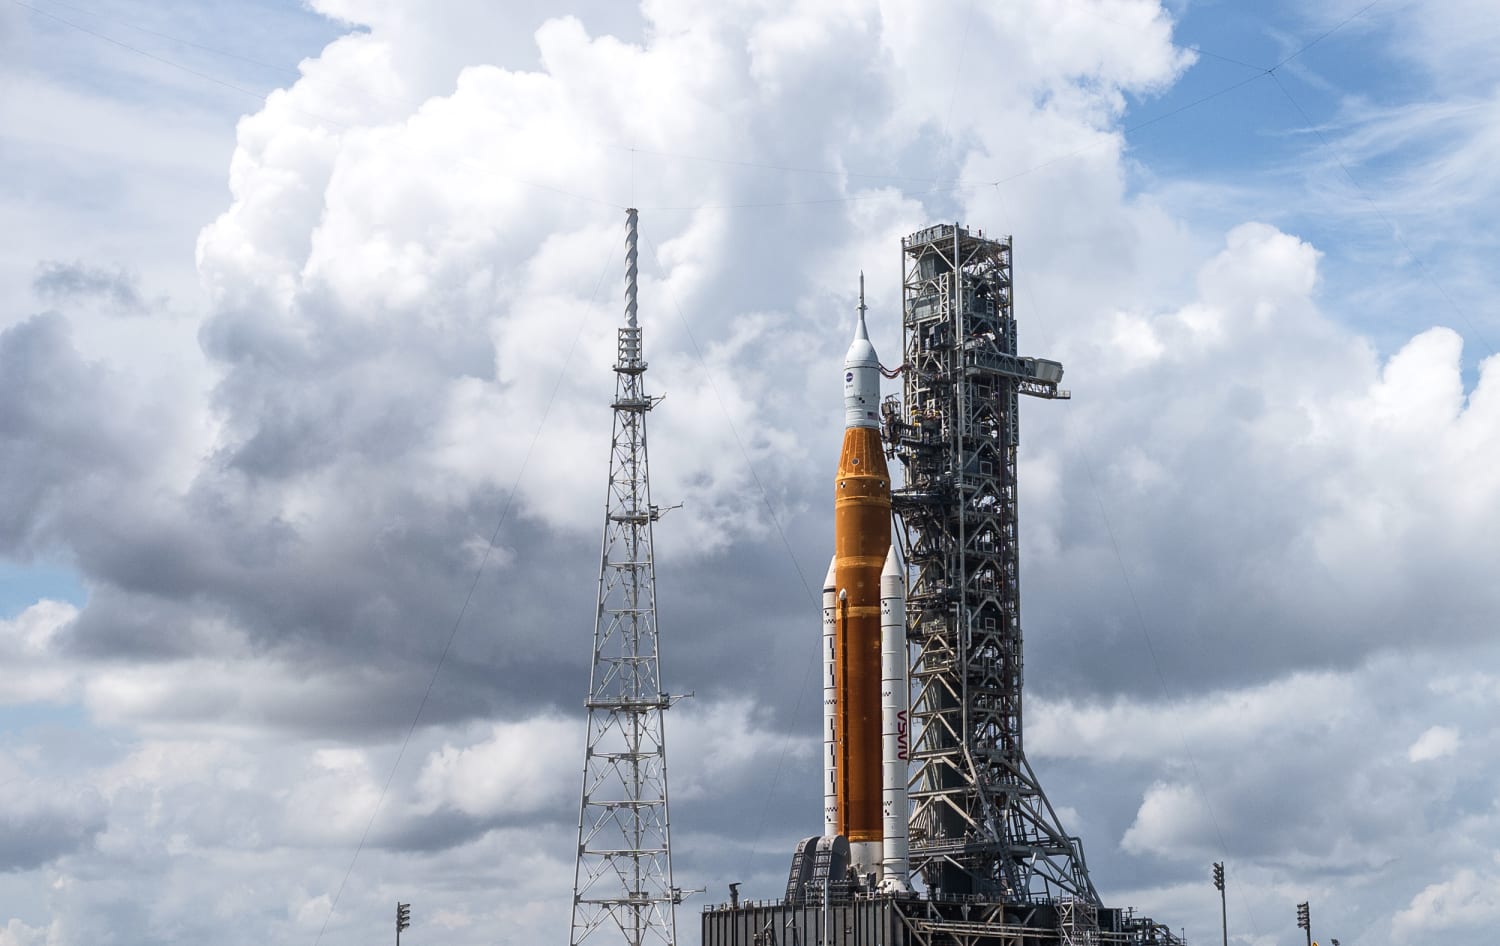 NASA’s Artemis I launch rescheduled after initial attempt scrubbed due to malfunction